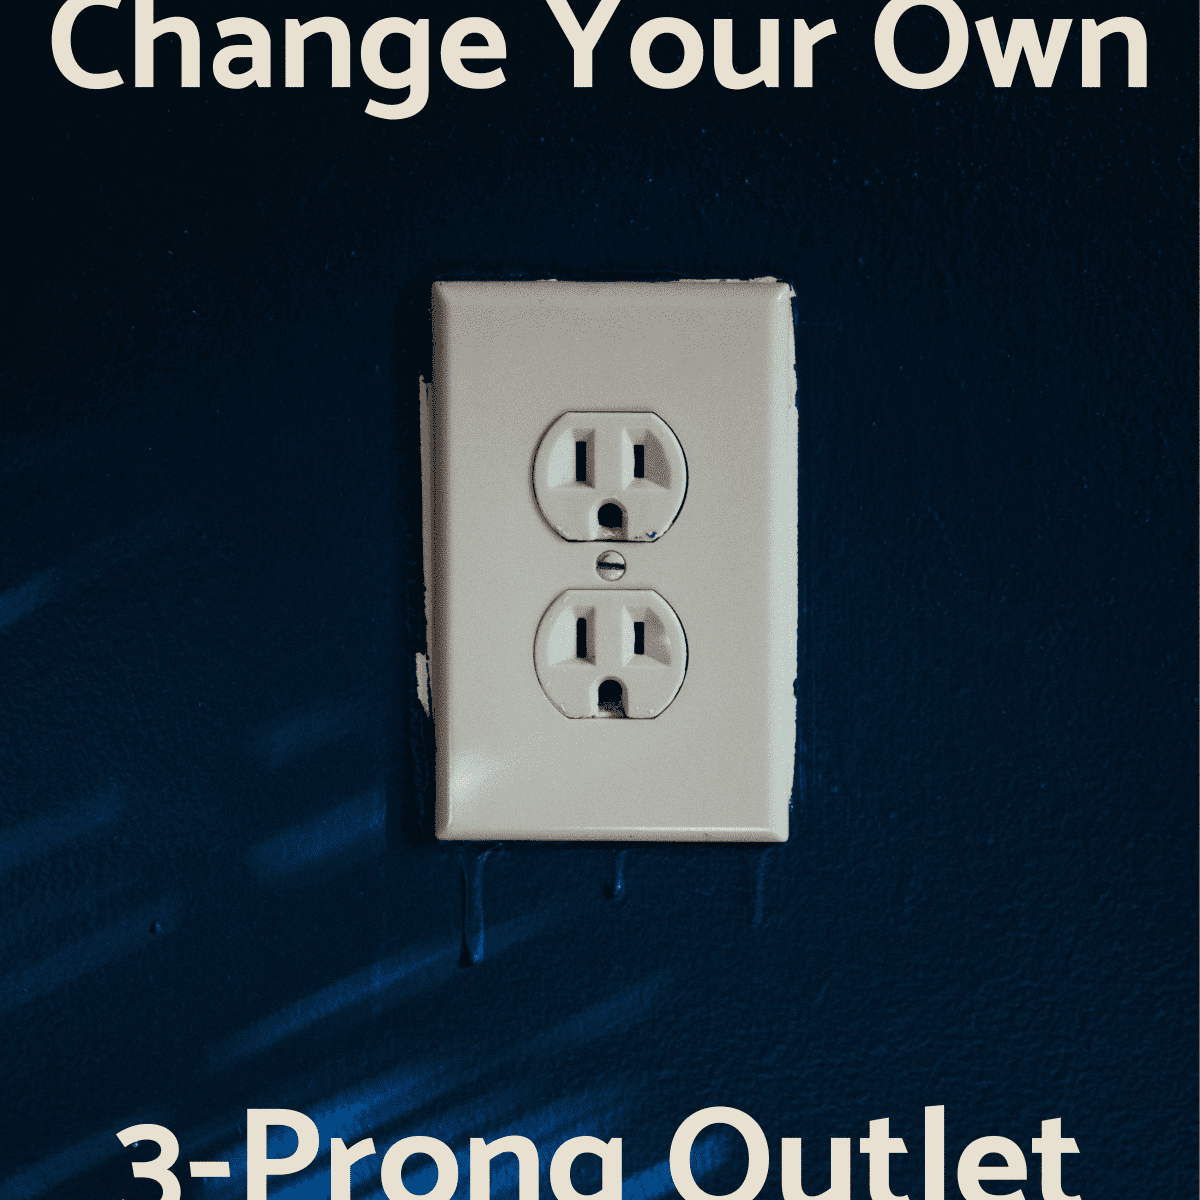 you can change an electrical outlet